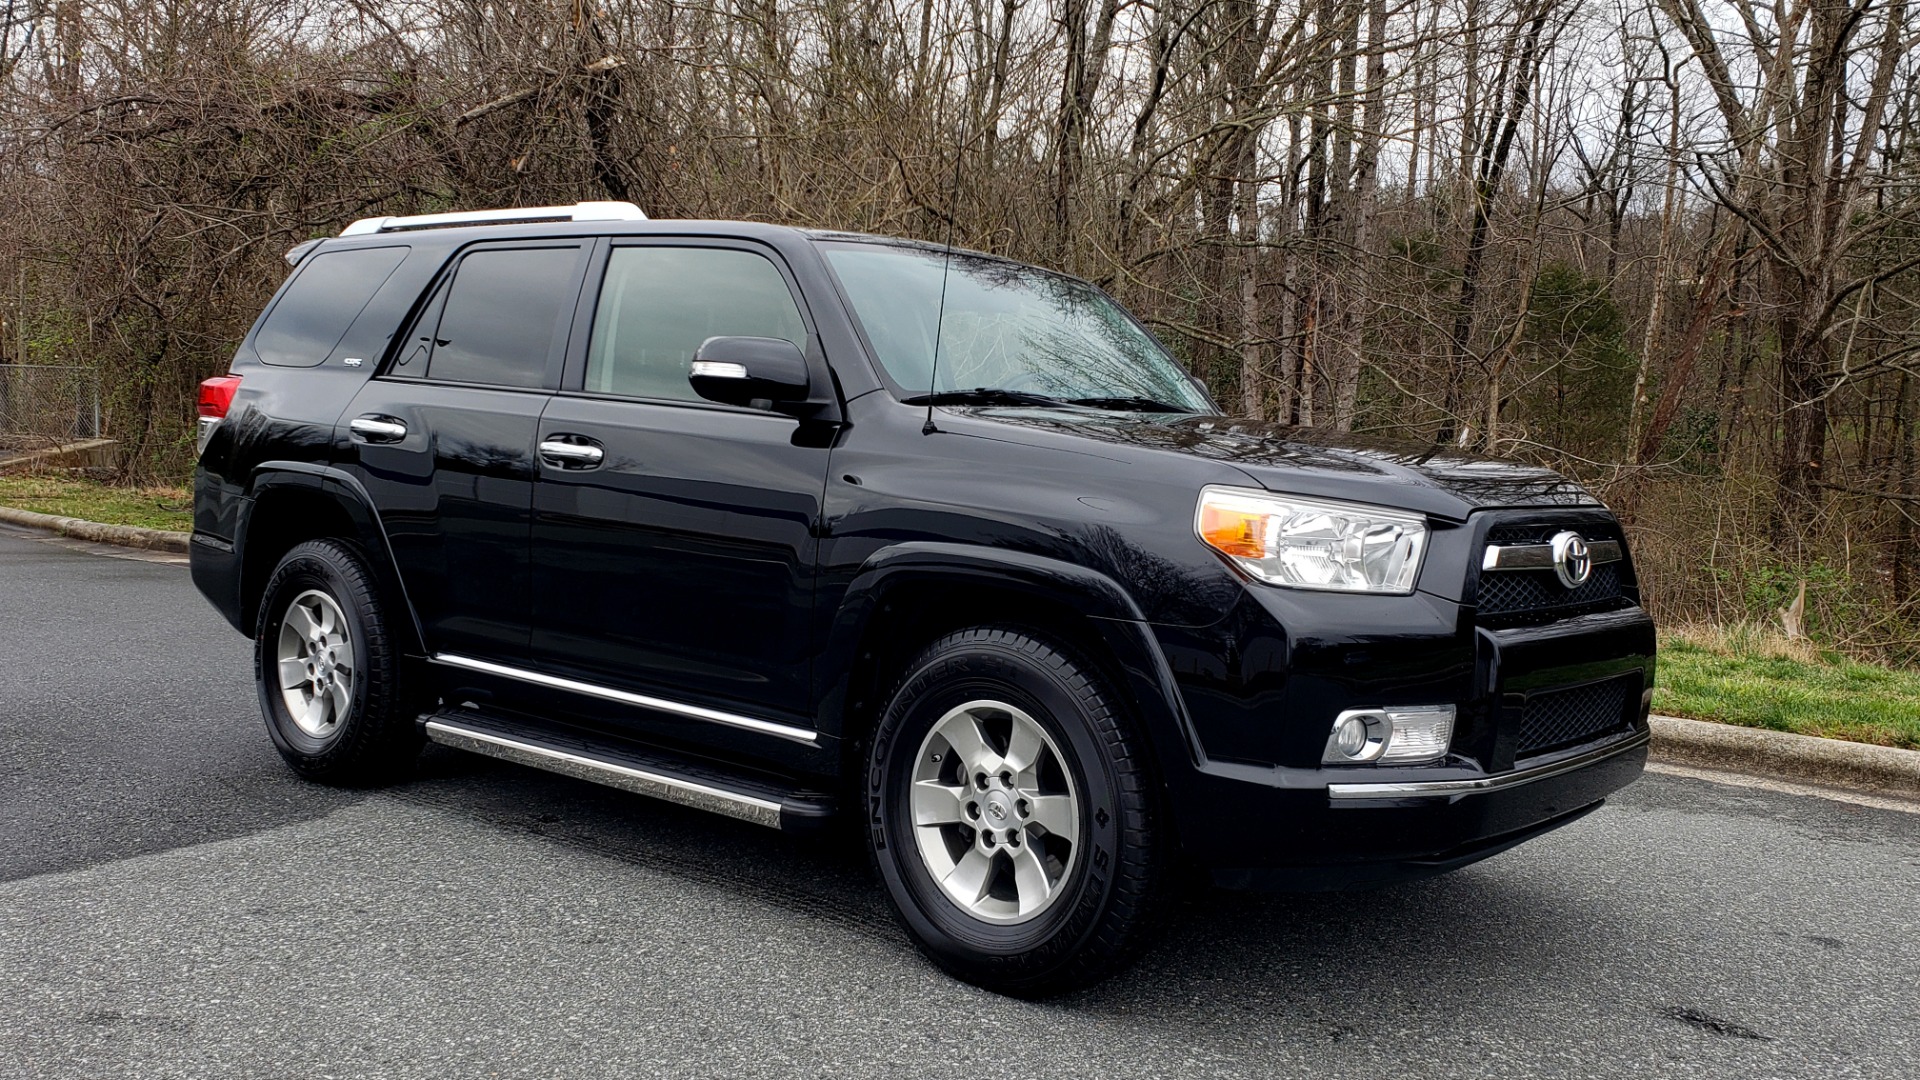 Used 2011 Toyota 4RUNNER SR5 2WD / 5-SPD AUTO / 4.0L V6 / SAT RADIO / PWR STS for sale Sold at Formula Imports in Charlotte NC 28227 4